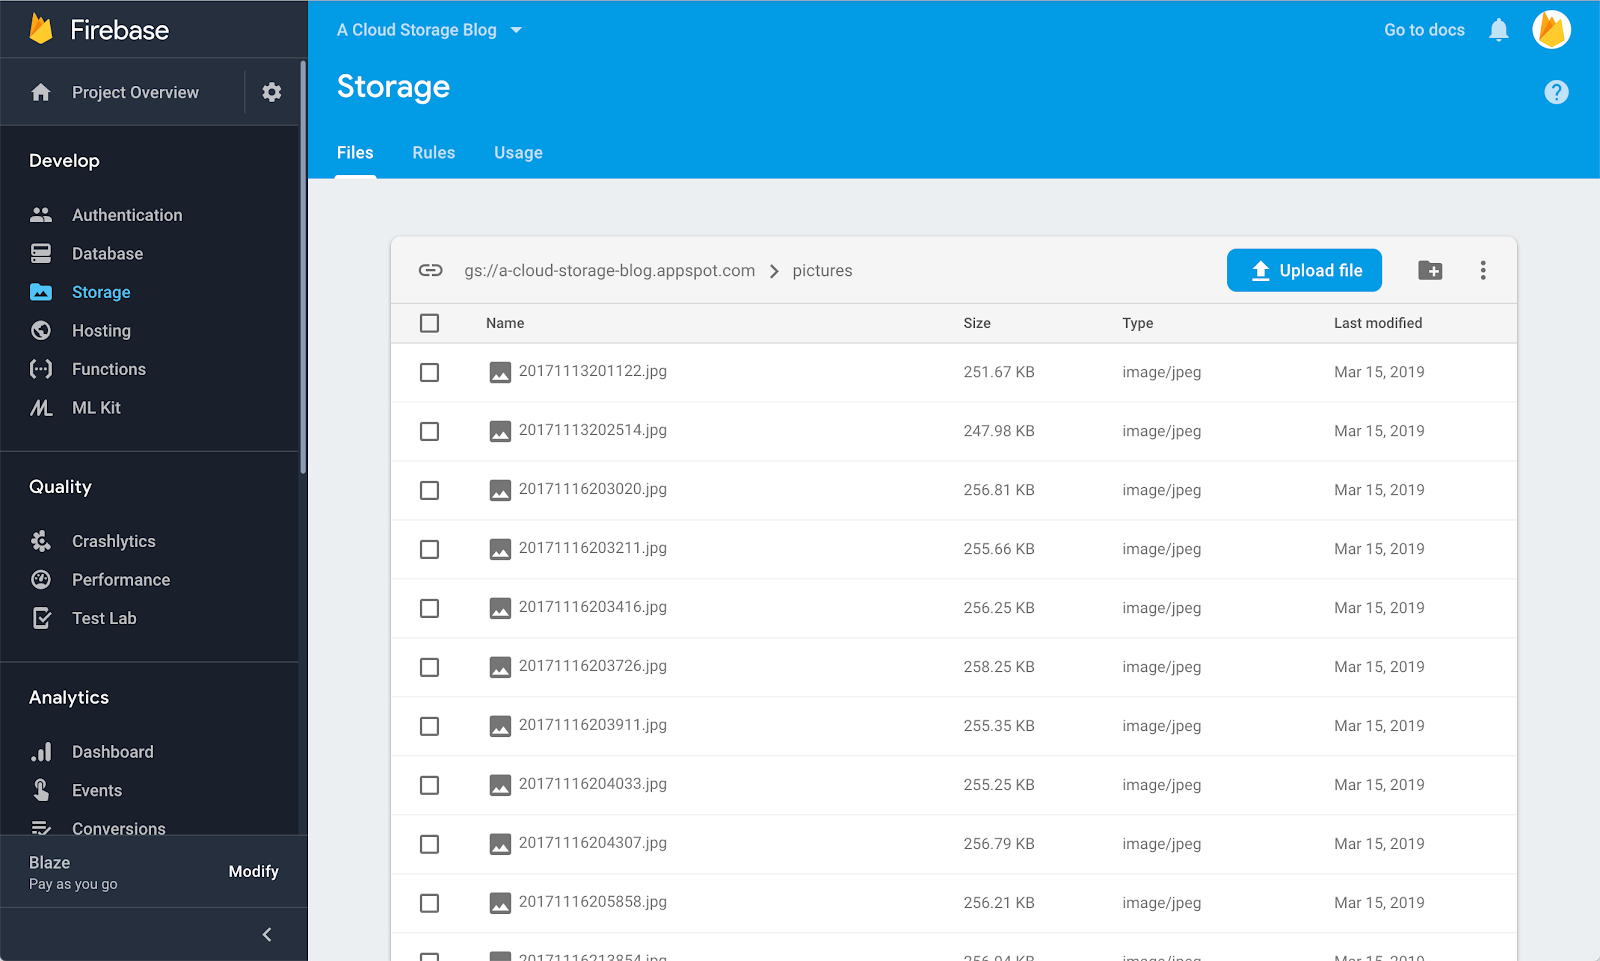 Firebase & Google Cloud: What's different with Cloud Storage?